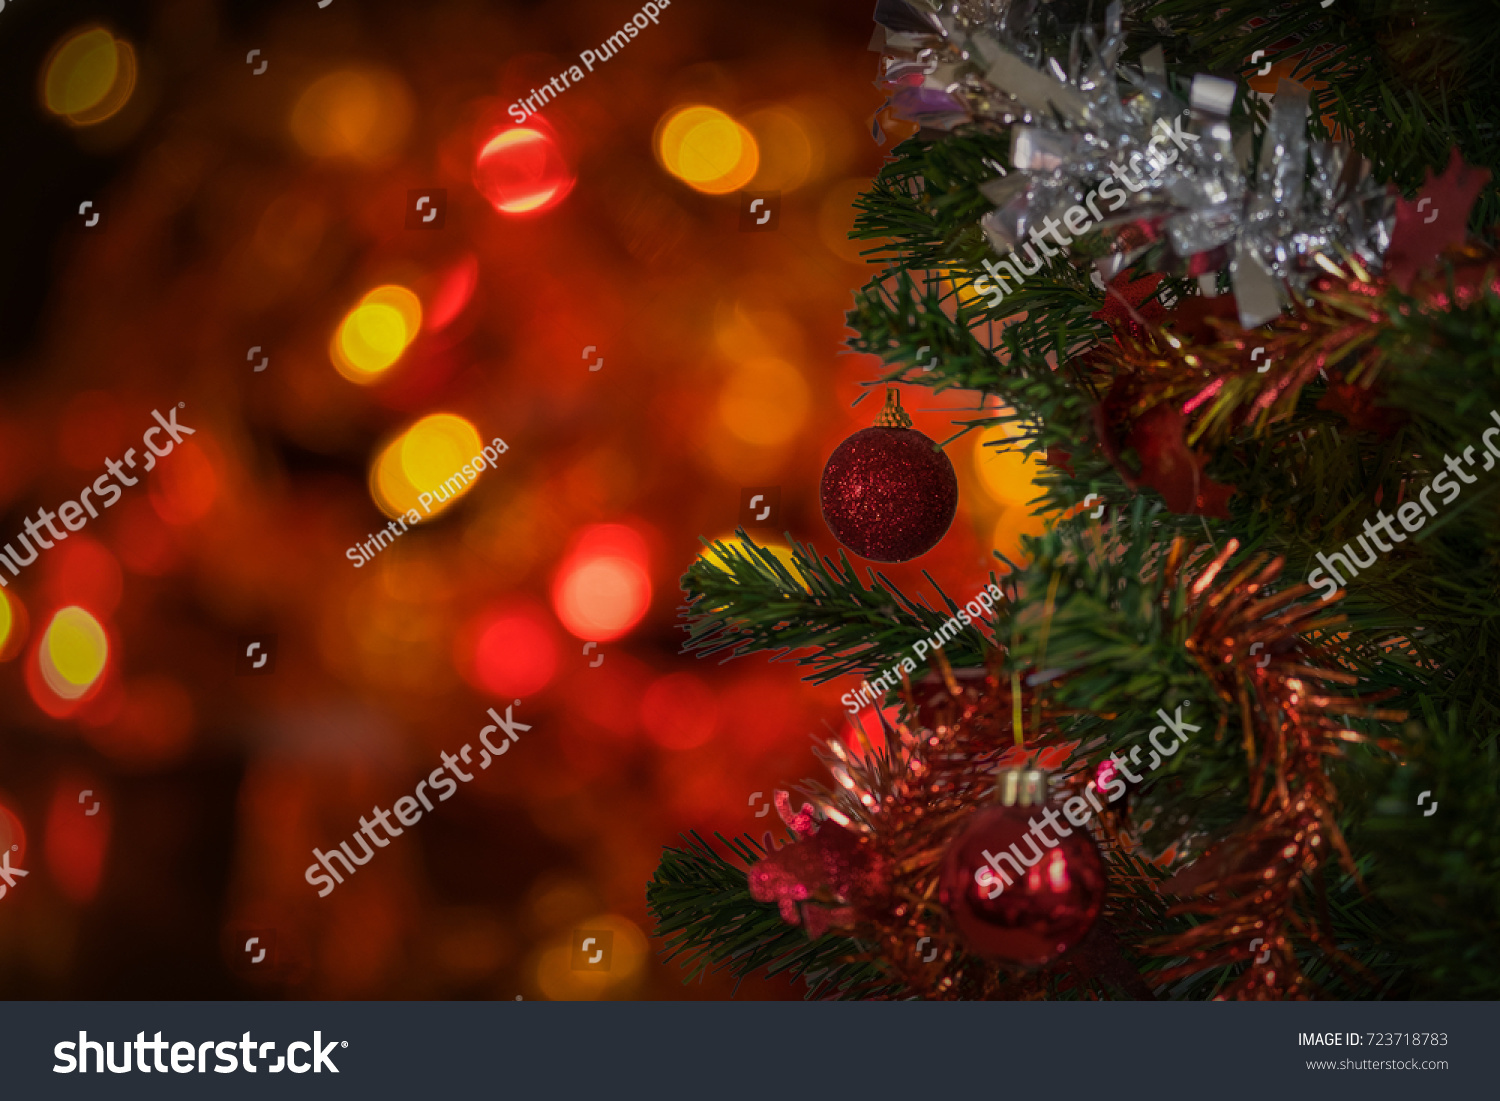 Decorated Christmas tree with blurred bokeh background #723718783